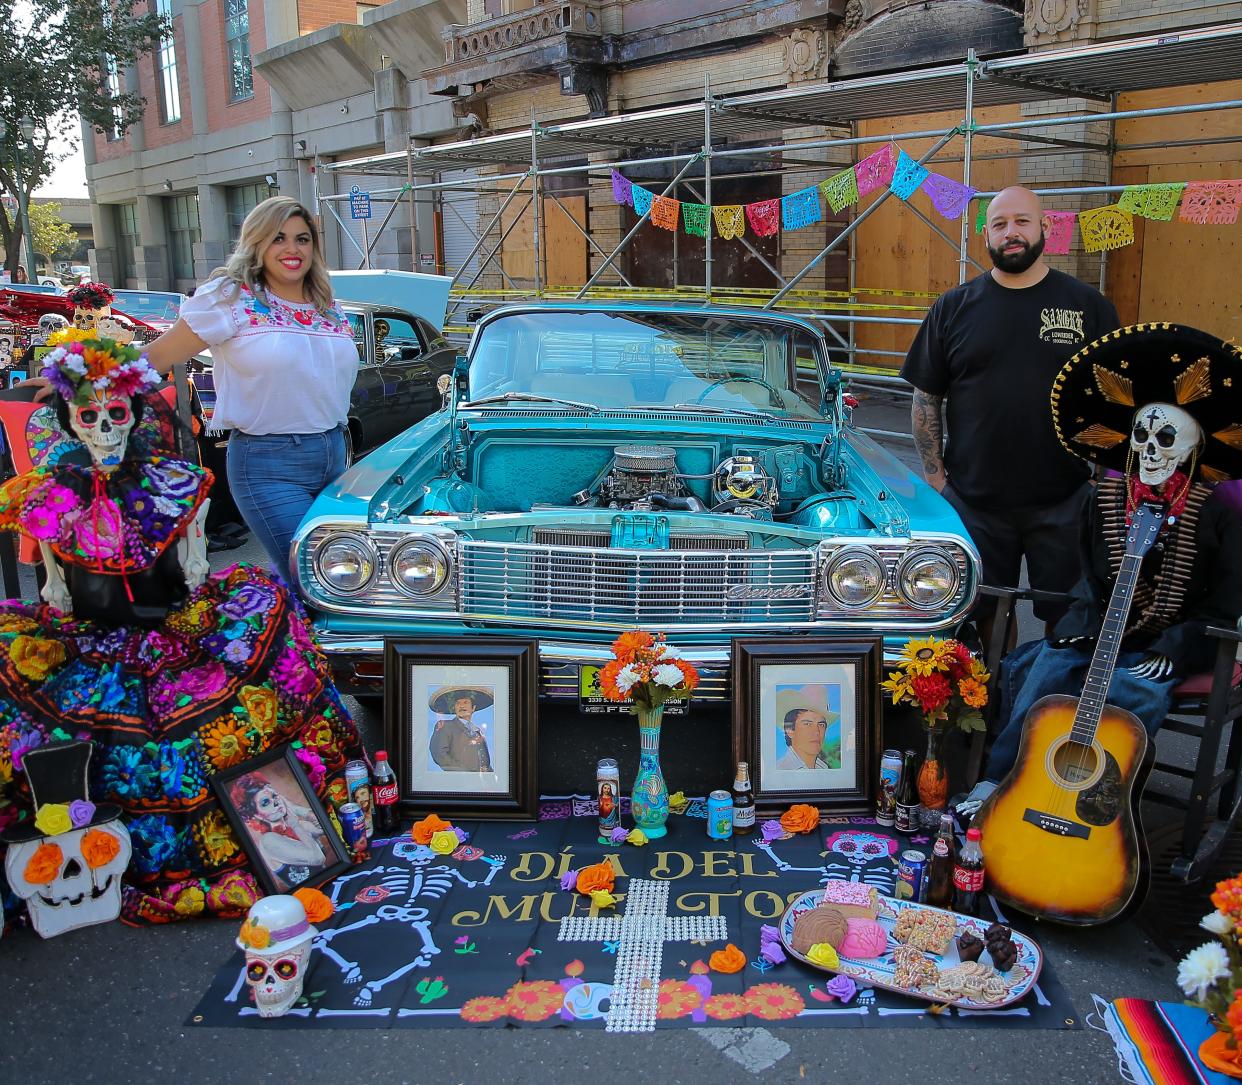 A couple show their love for those lost by dressing their altar with their loved ones favorite things at the Dia de los Muertos at the Mexican Heritage Center in downtown Stockton. Dan Rogers for the Record.